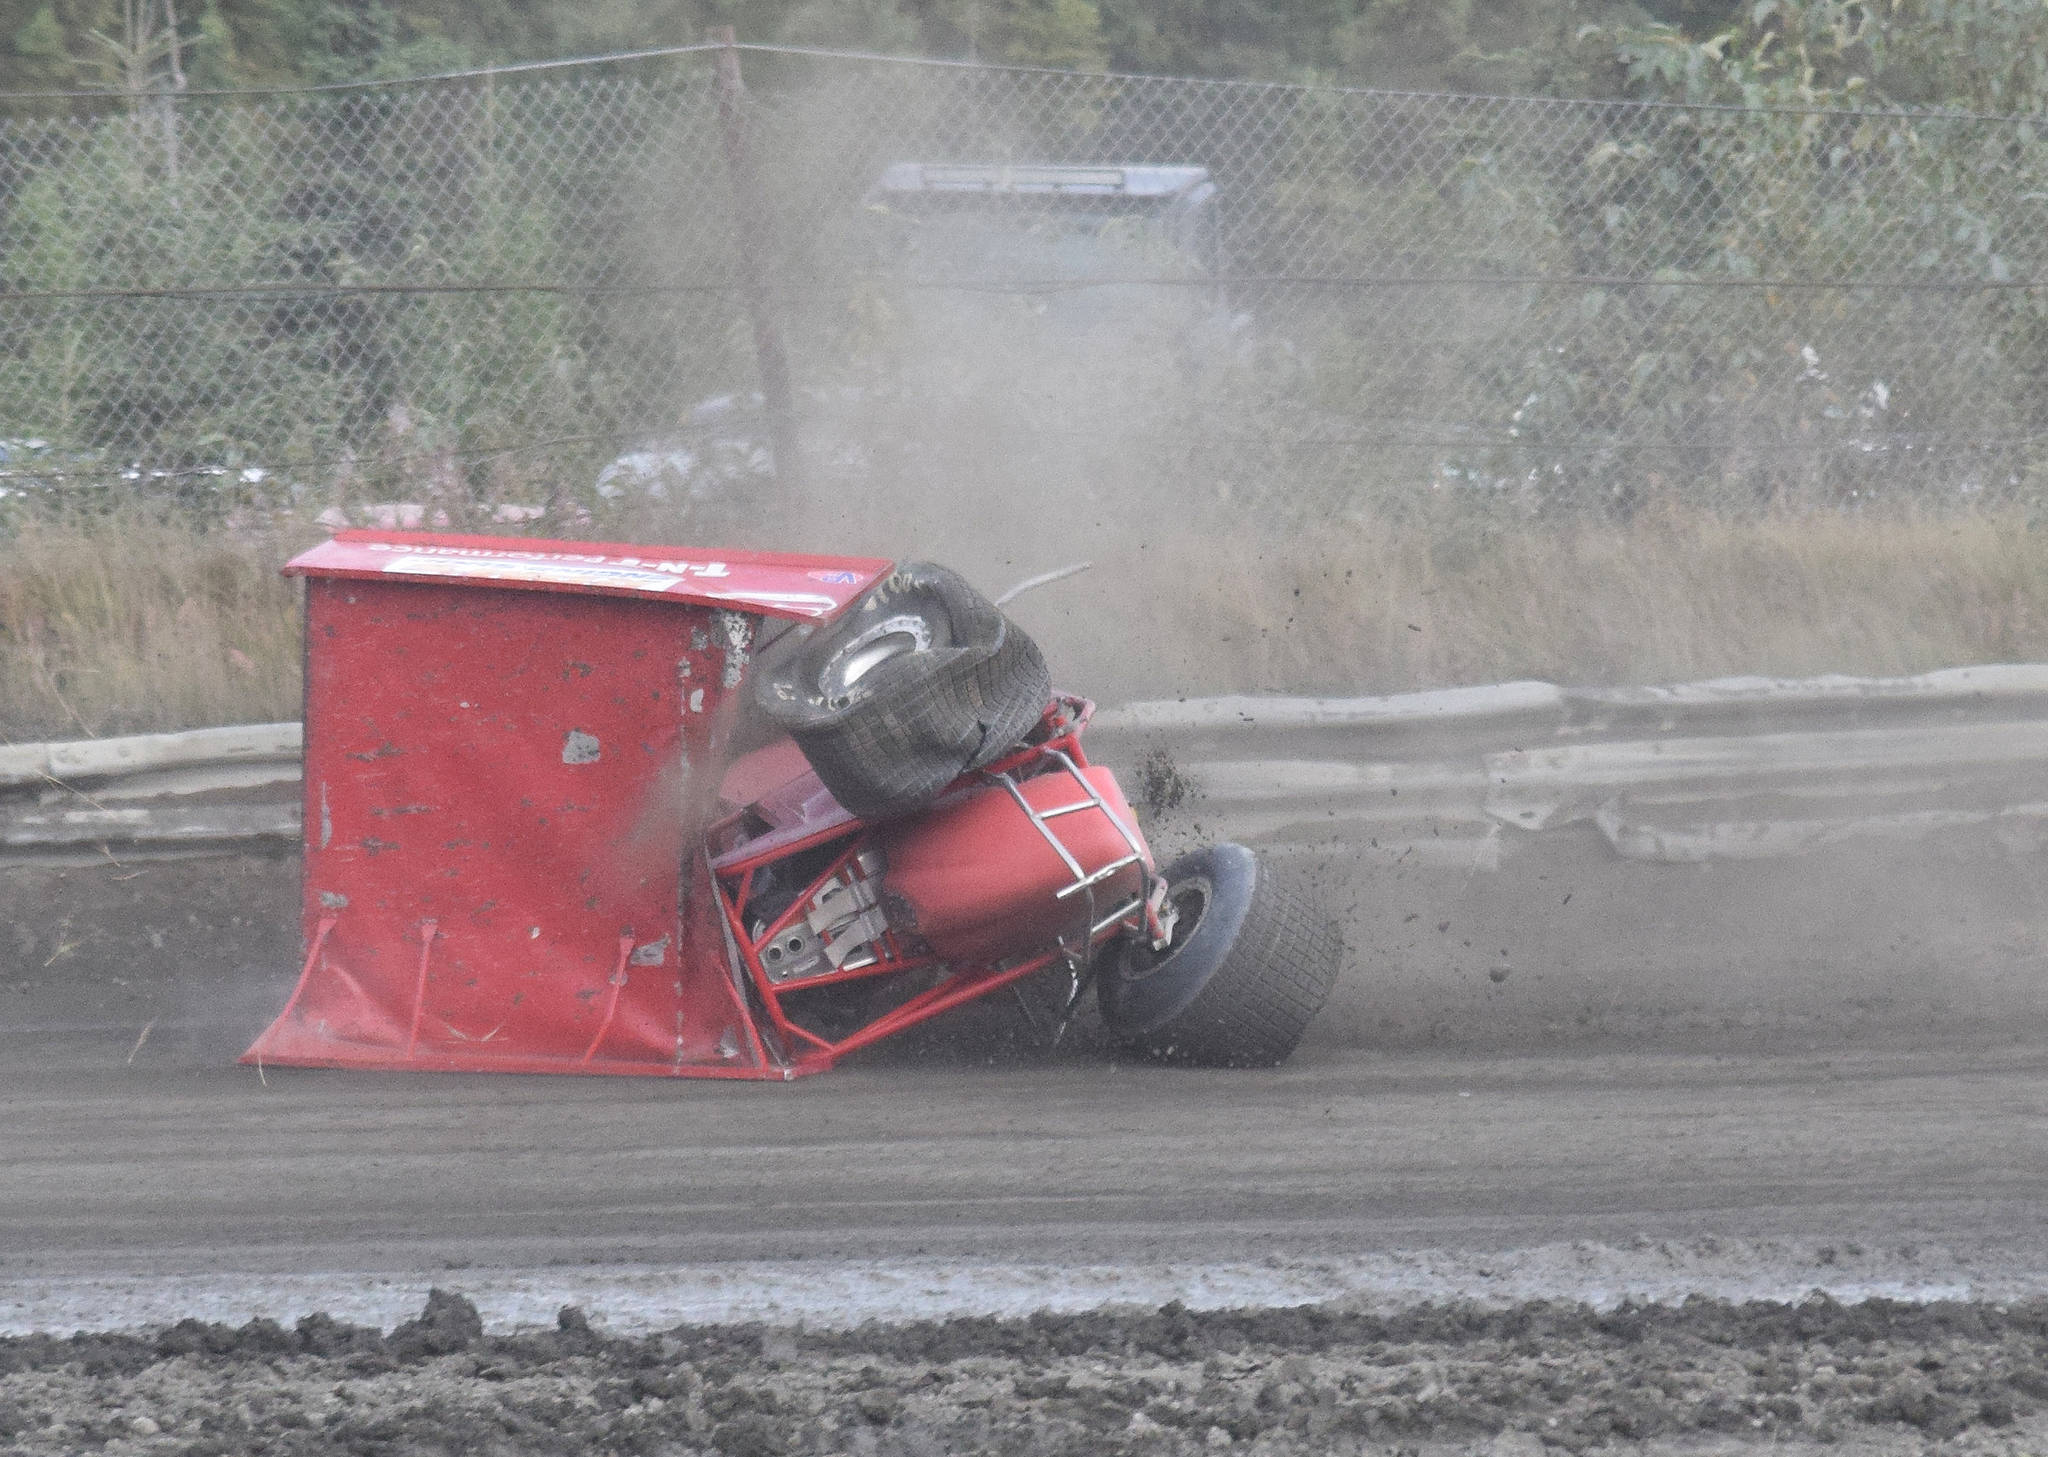 Sprint Car racer John Mellish comes to a rest after a flipping crash Friday, Sept. 6, 2019, at Twin City Raceway in Kenai, Alaska. Mellish was unhurt in the incident. (Photo by Joey Klecka/Peninsula Clarion)